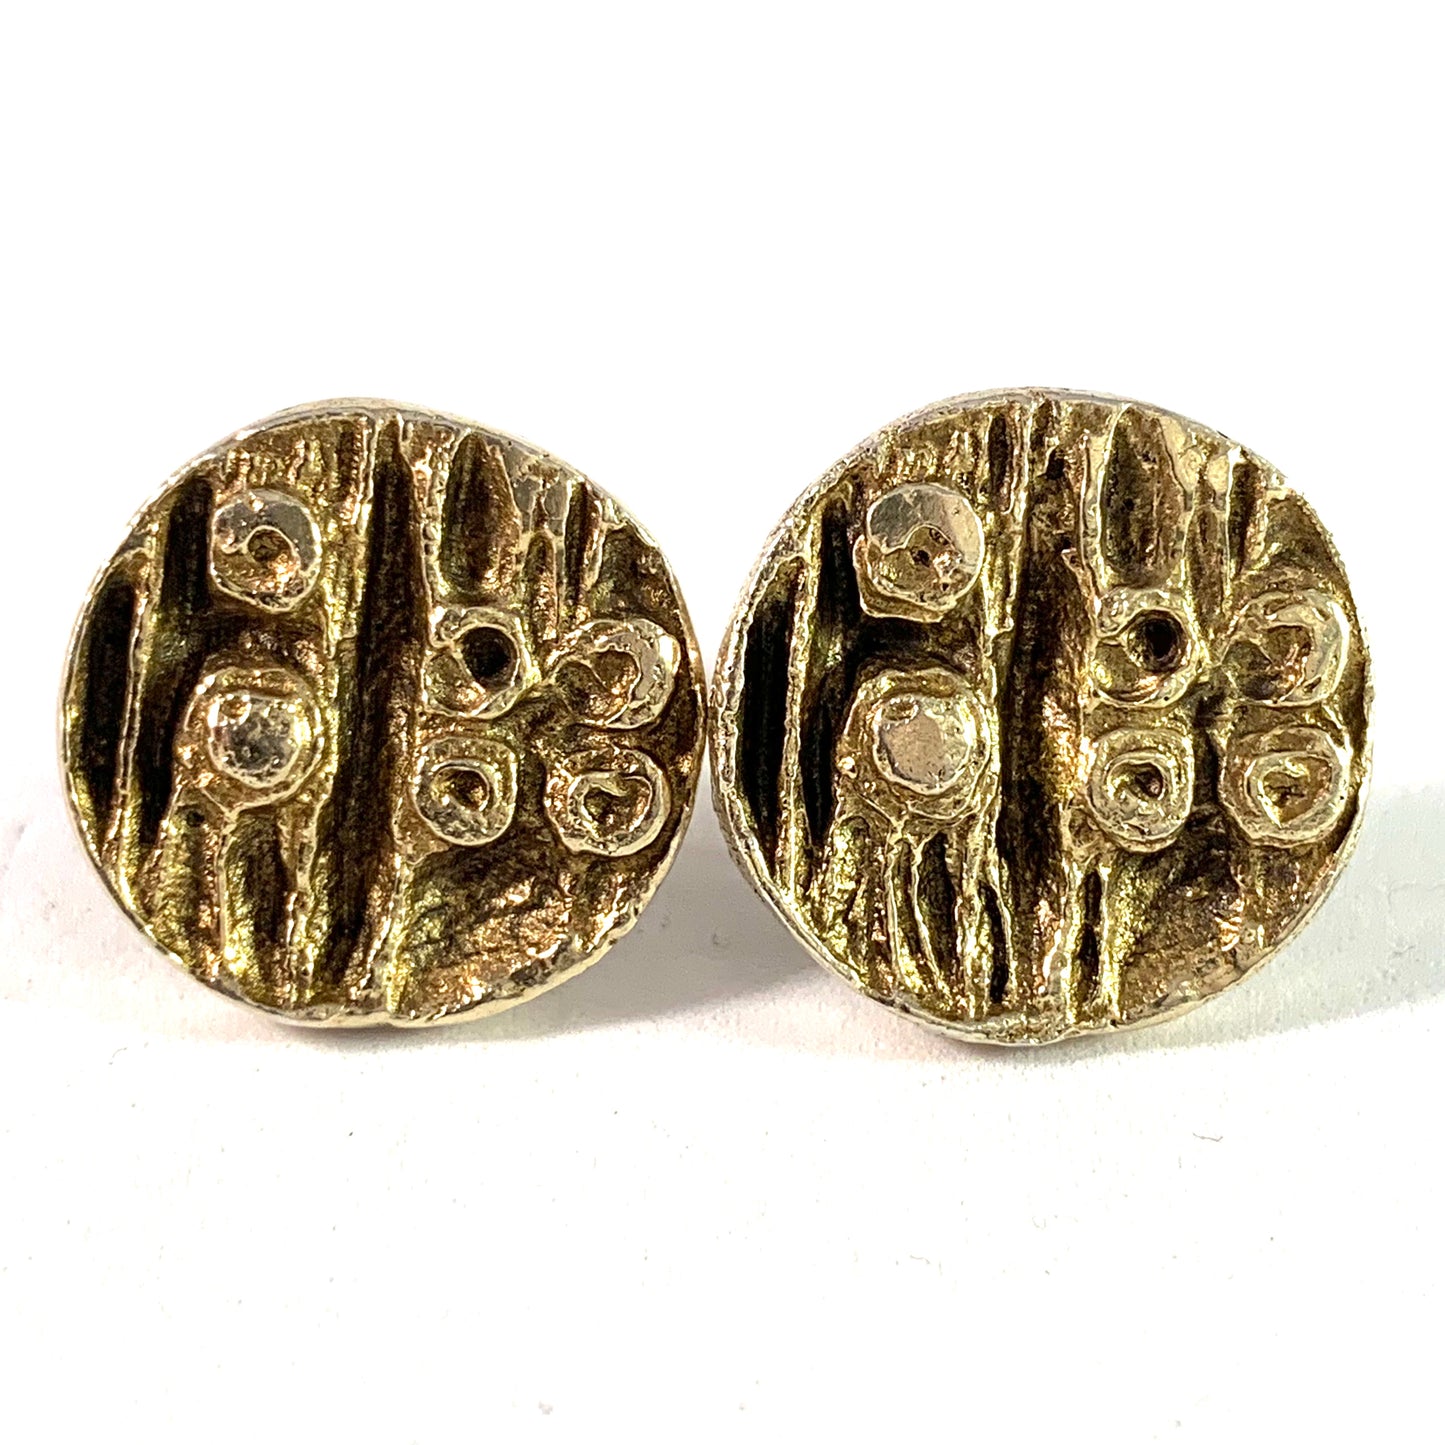 Vintage 1960s Gilt 935 Sterling Silver Large Pair of Cufflinks.